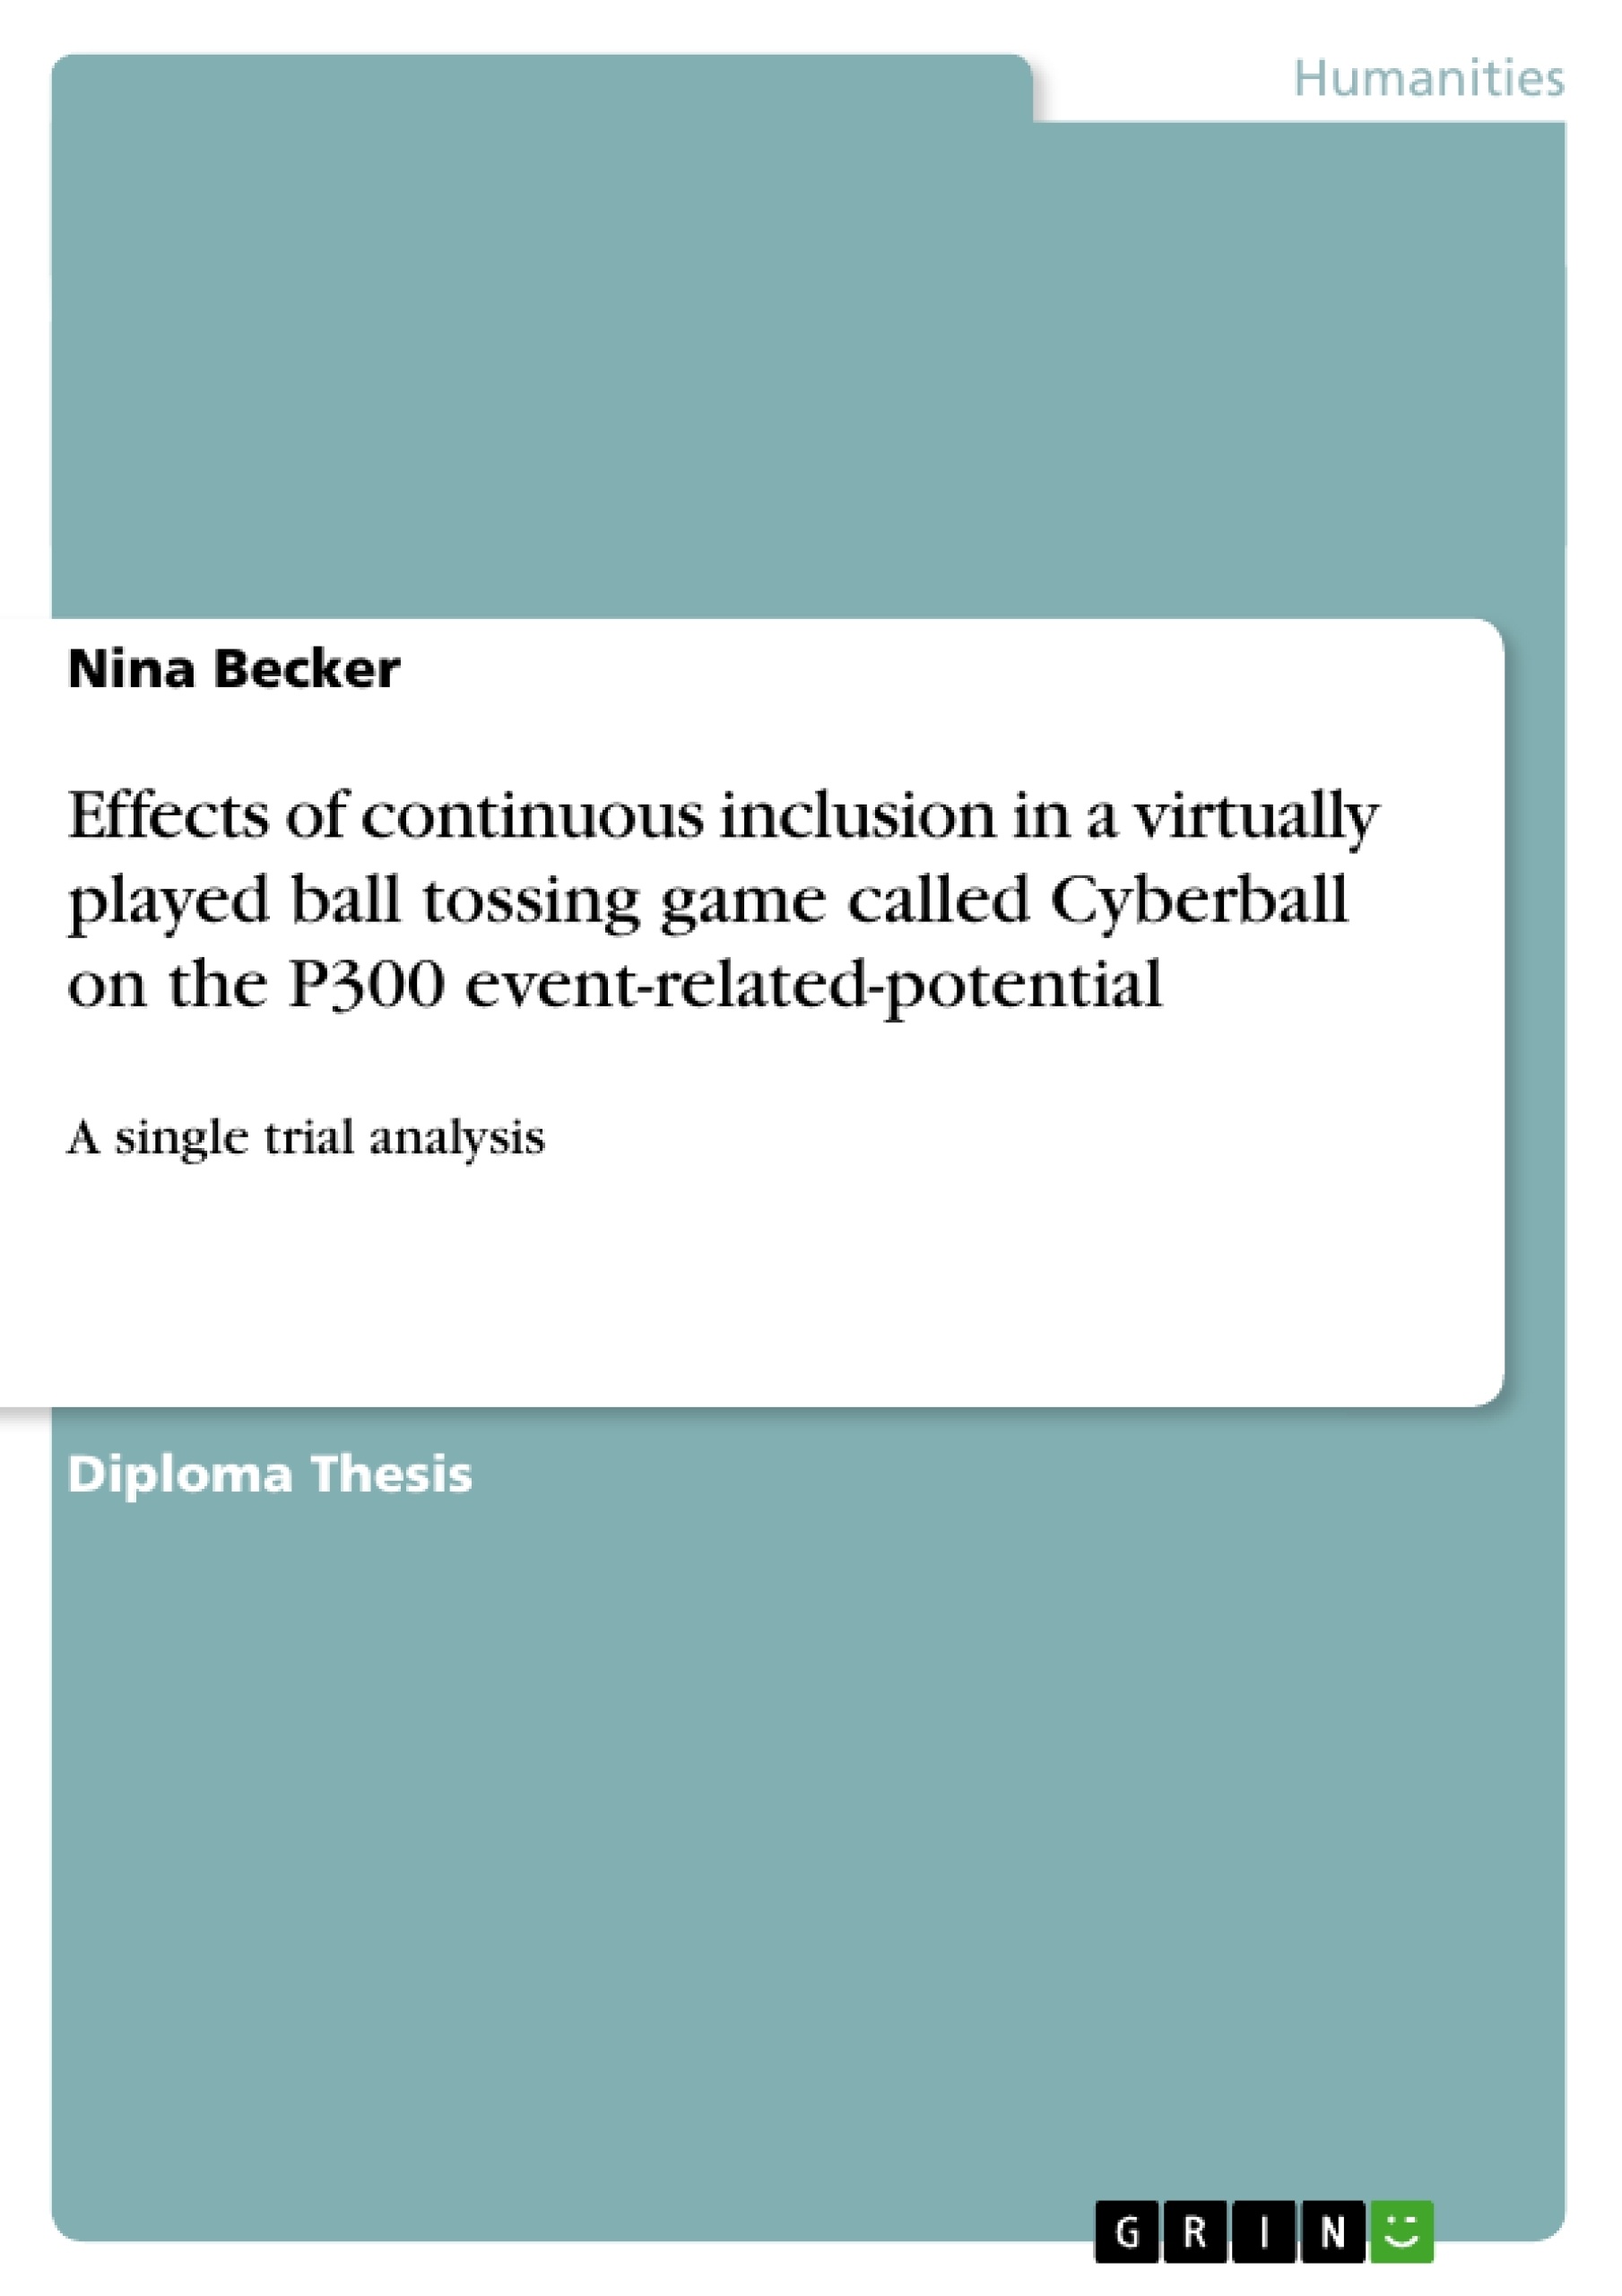 Titre: Effects of continuous inclusion in a virtually played ball tossing game called Cyberball on the P300 event-related-potential